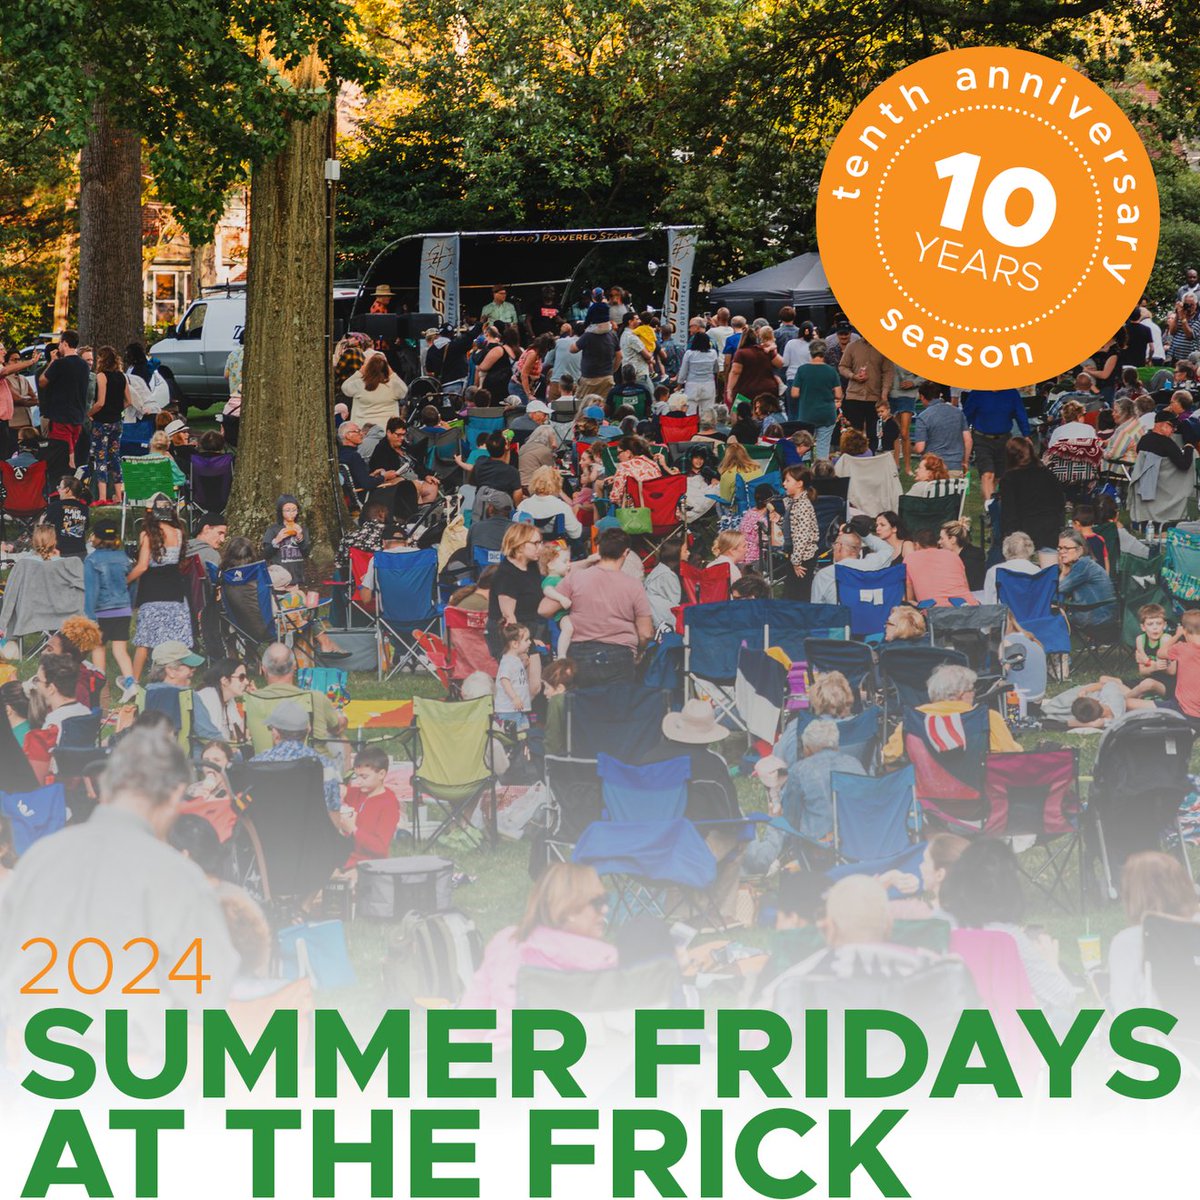 Celebrate 10 years of Summer Fridays at the Frick, and 30 years of music on our lawns during our 2024 Summer Fridays season. You won’t want to miss this year’s extraordinary lineup!